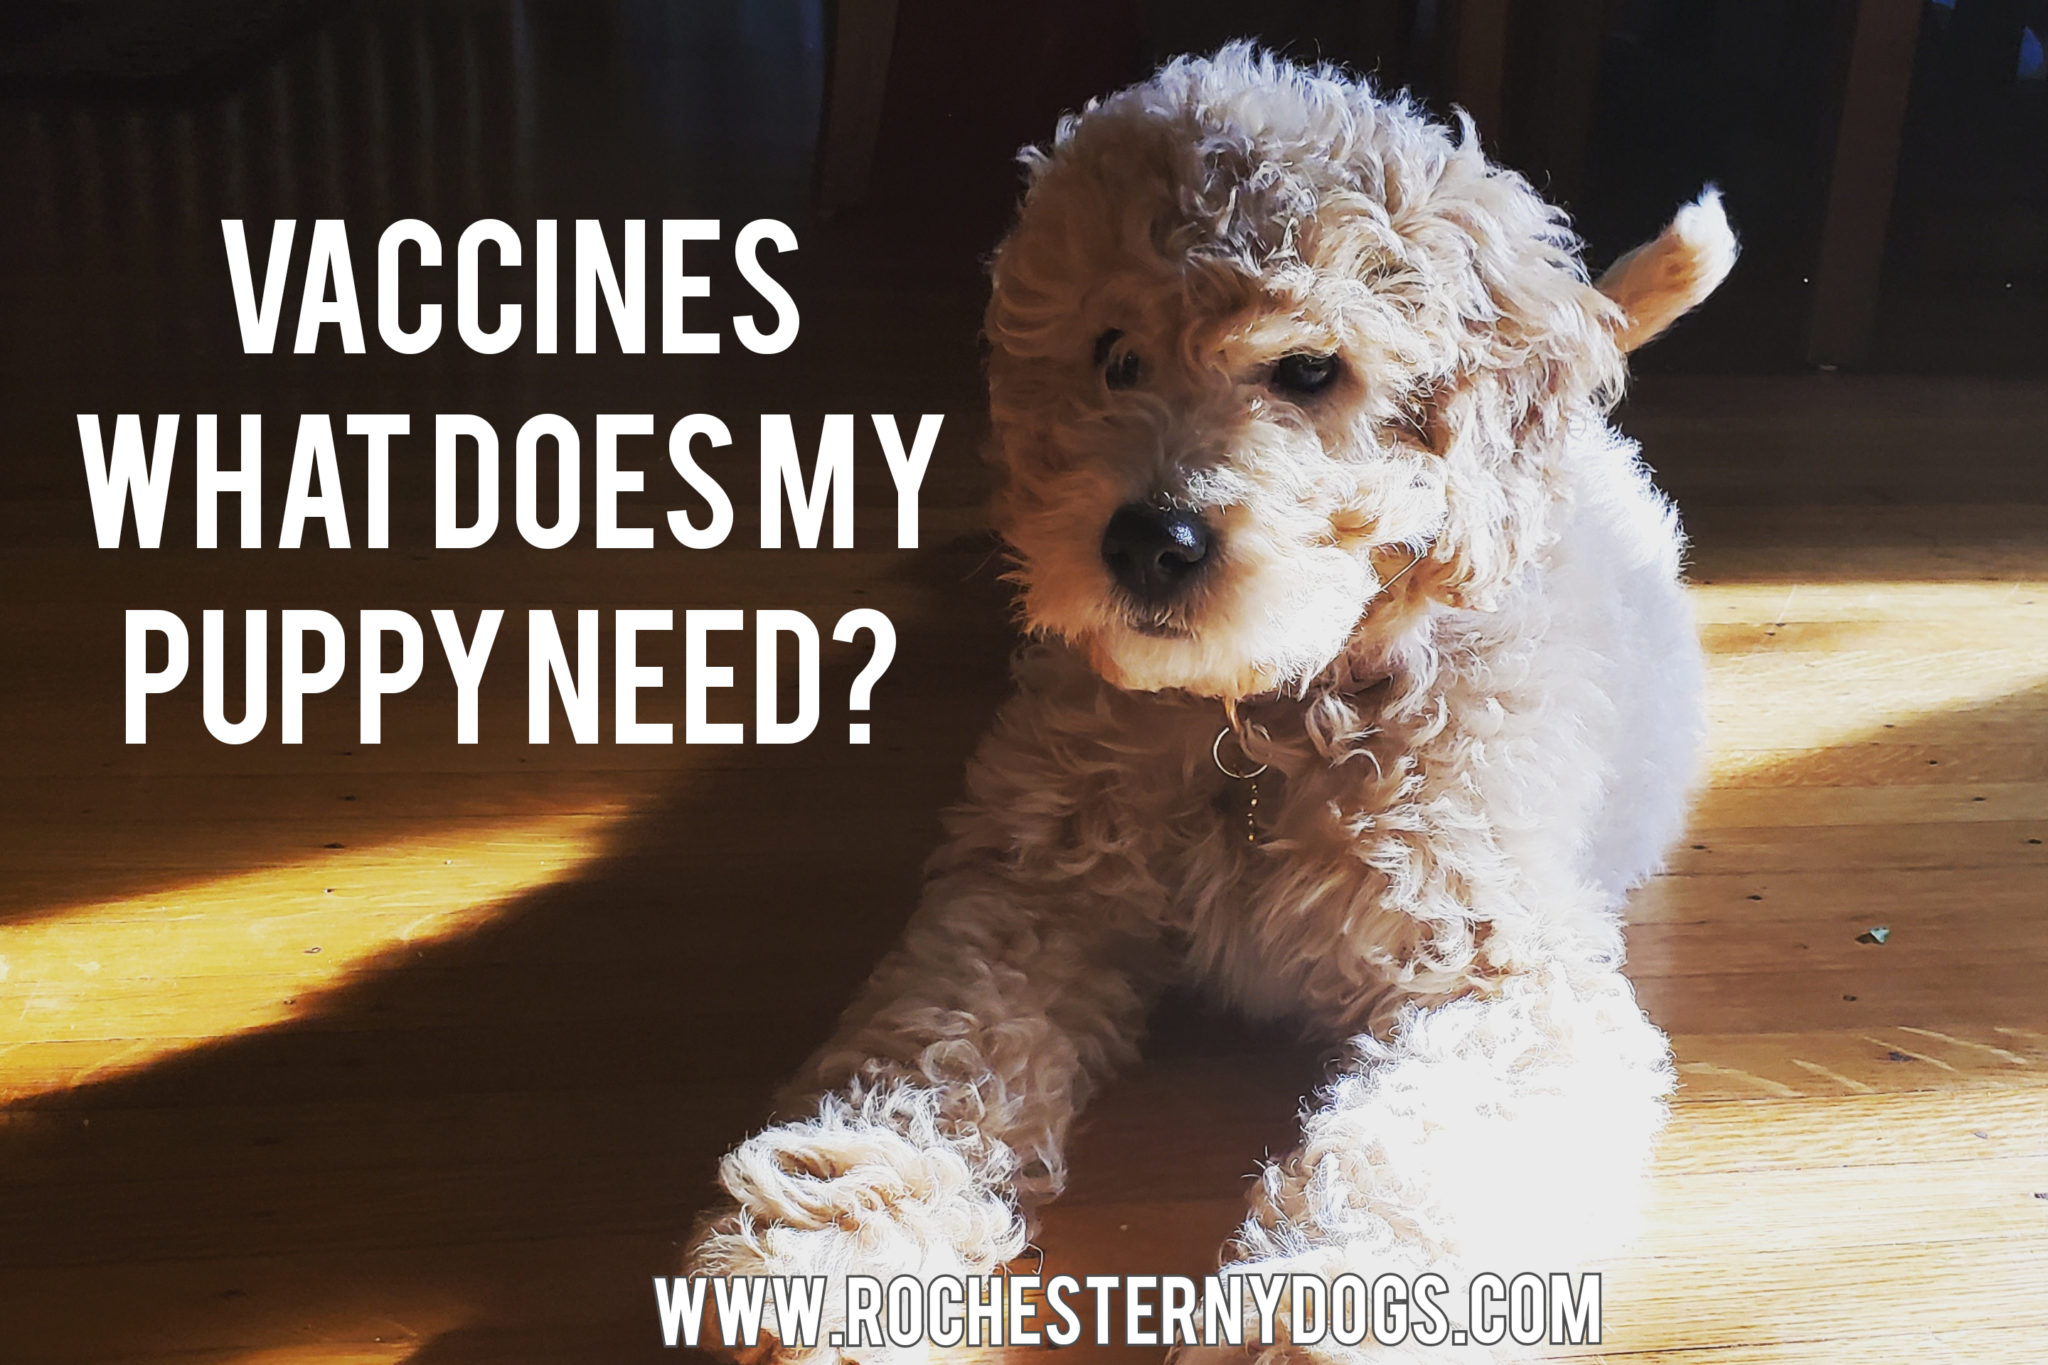 What vaccinations are required for puppies to begin training classes